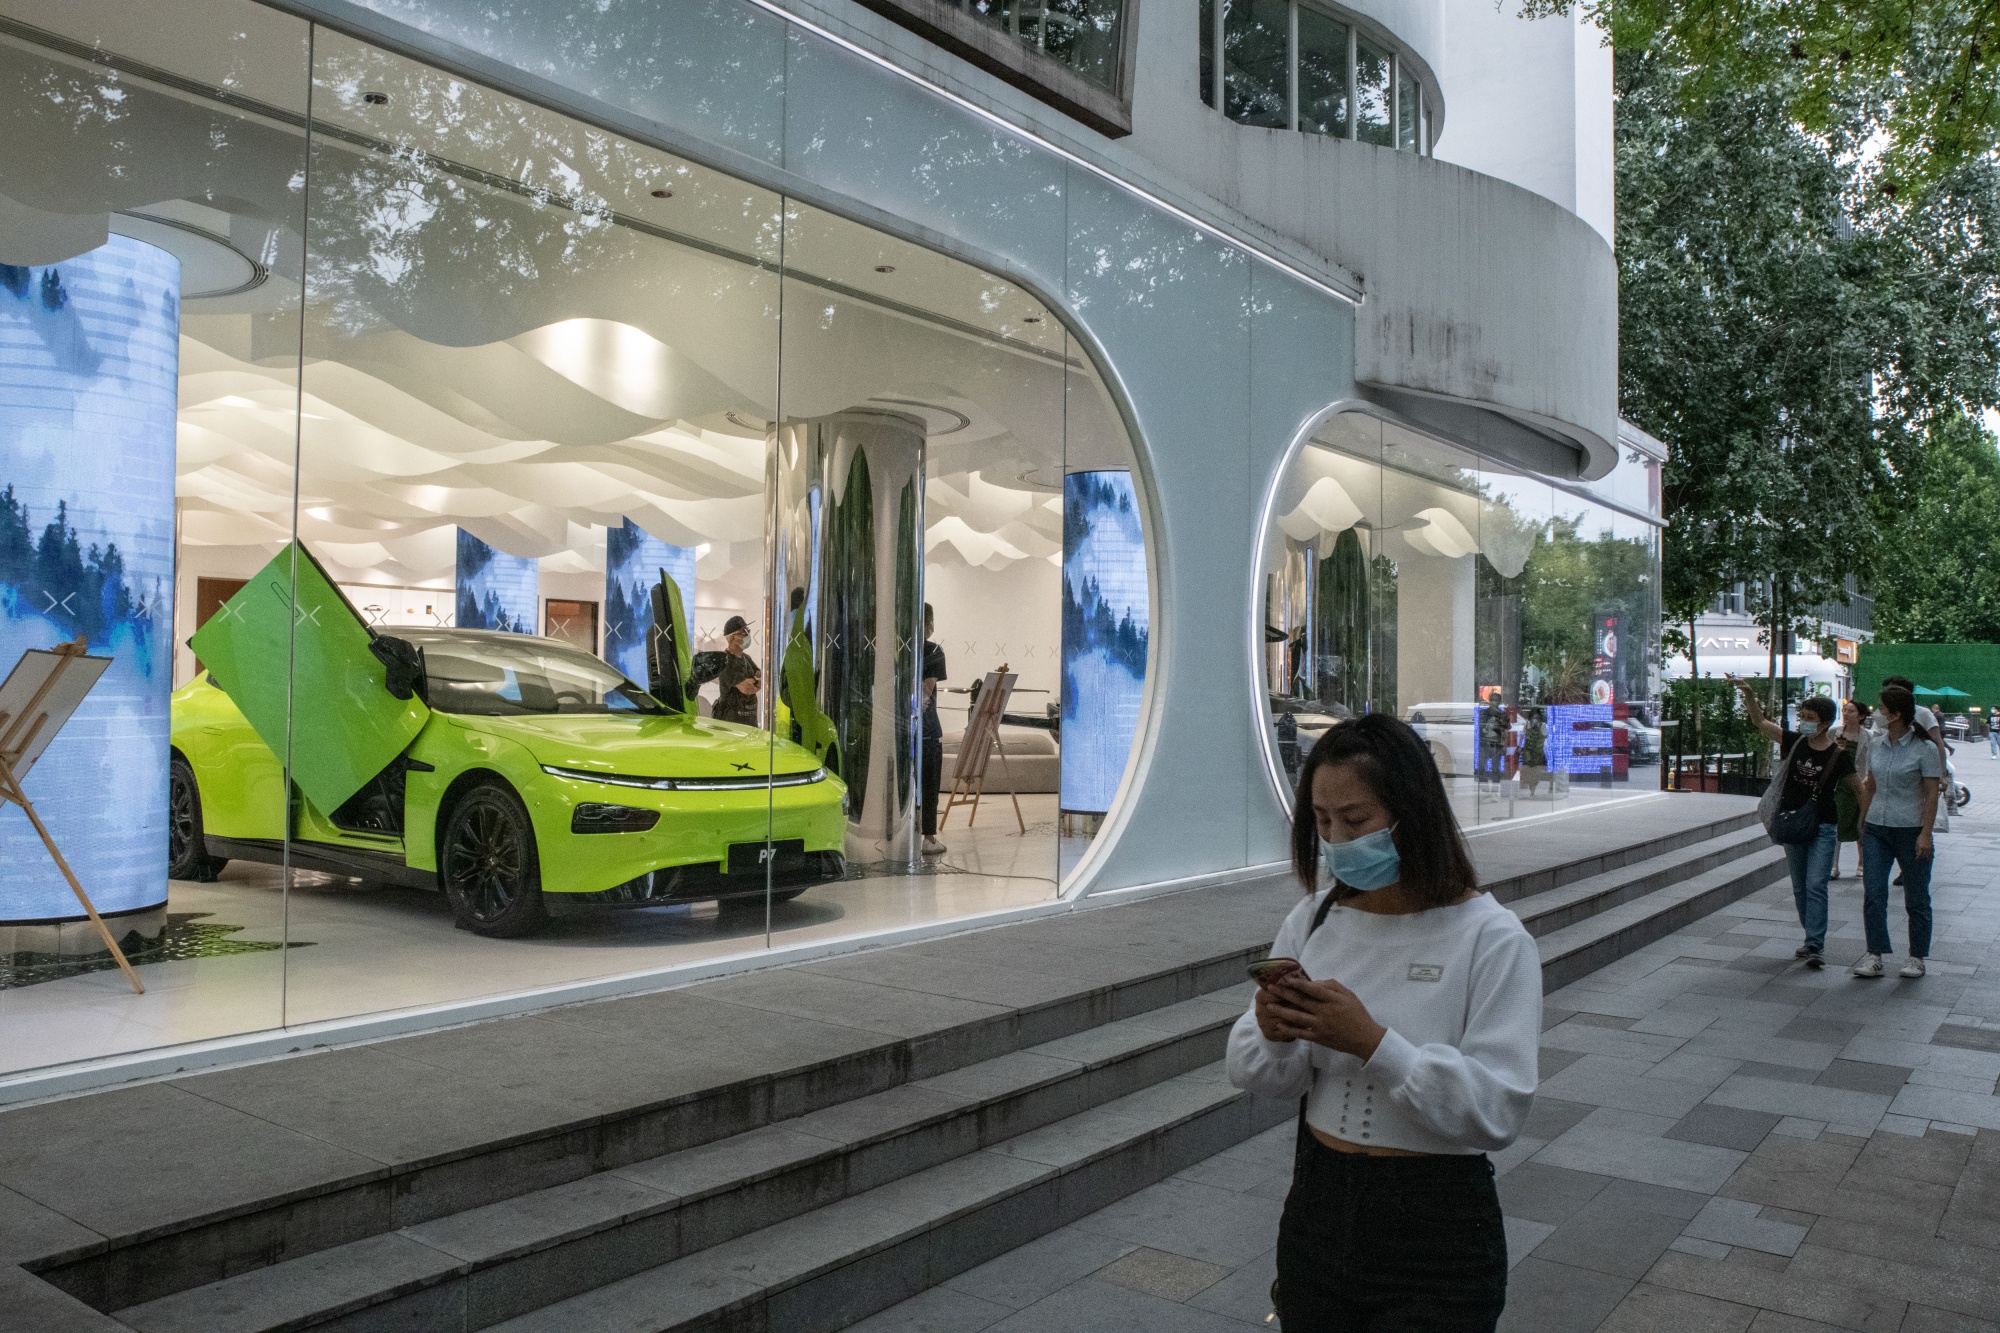 Tesla China Executives Visit Owners Clubs In Many Cities To Gain Insig